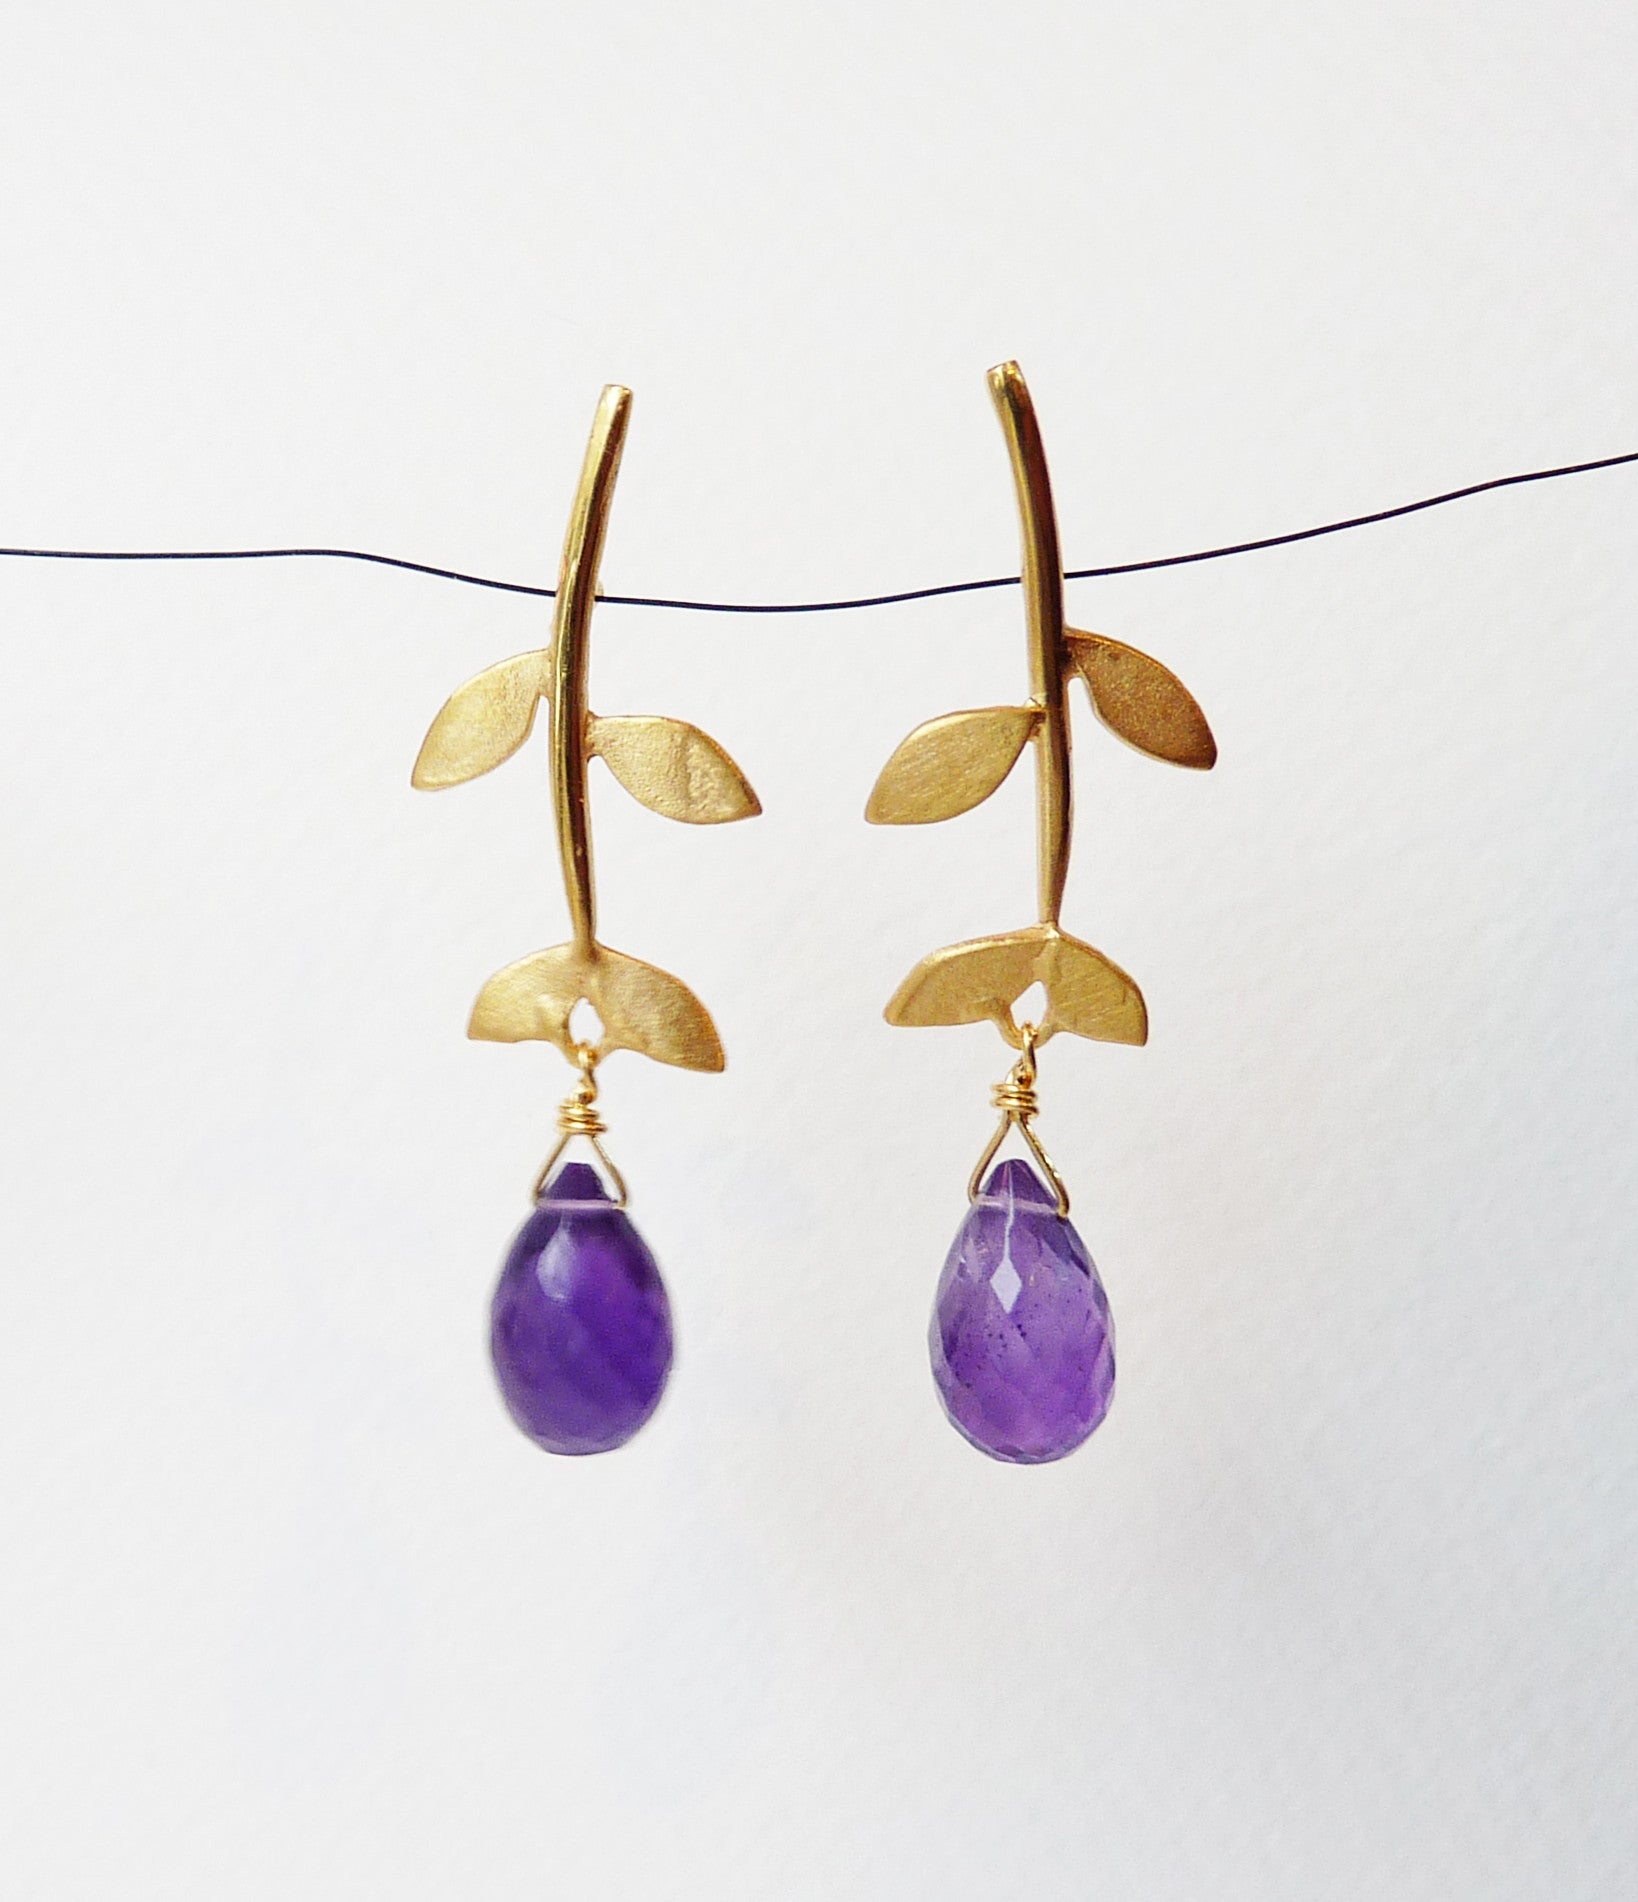 Blossoming, branch, jewellery, jewelry, earrings, studs, sterling, silver, 18ct, gold, nature, natural, amethyst, smoky, quartz